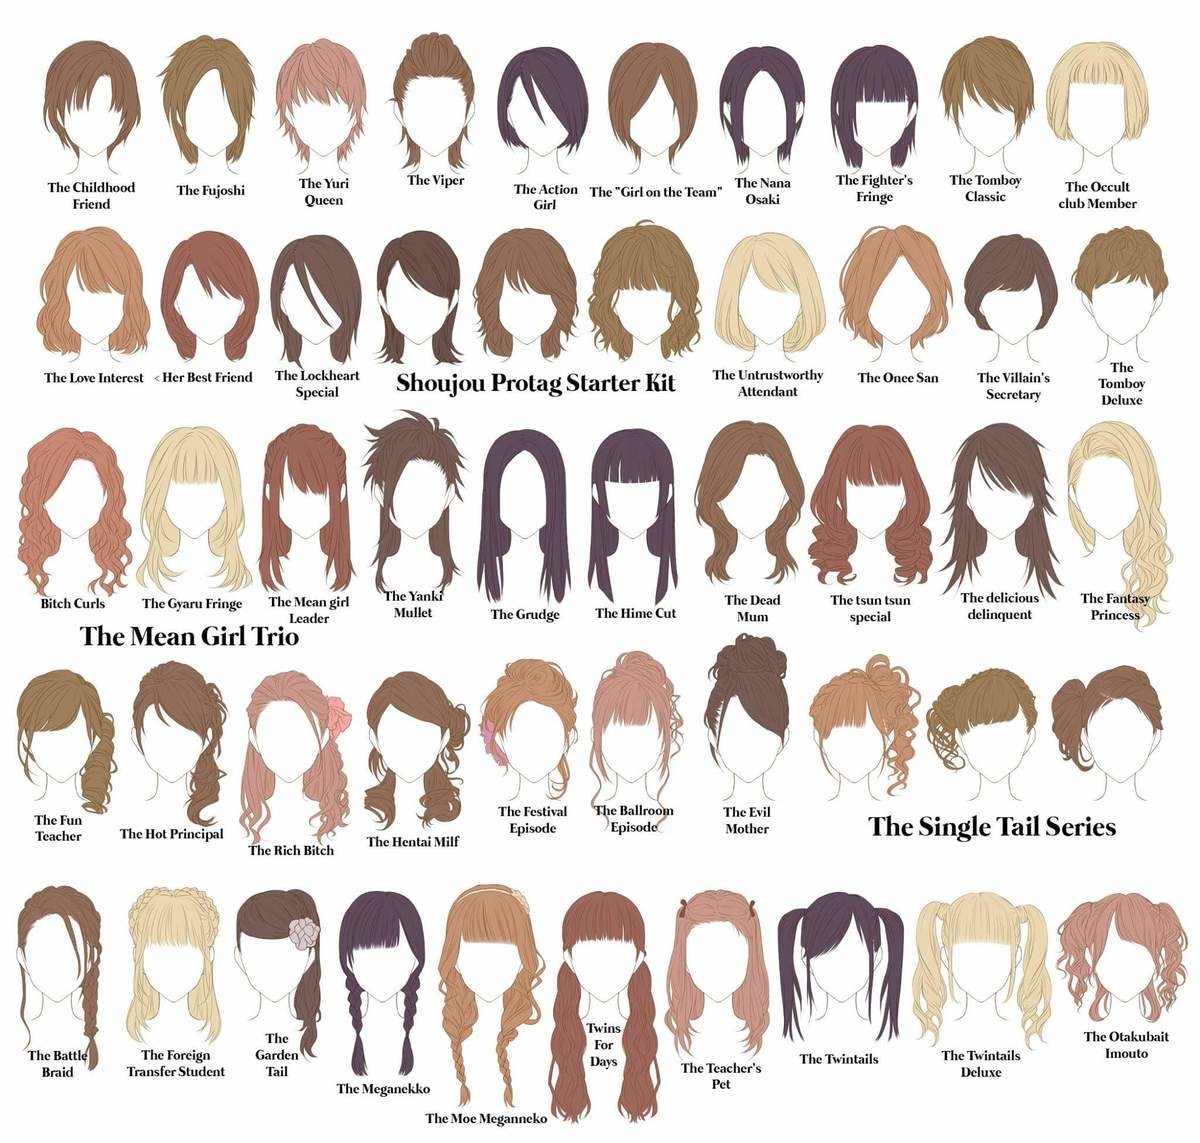 Whats Your Favorite AnimeGirl Hairstyle?